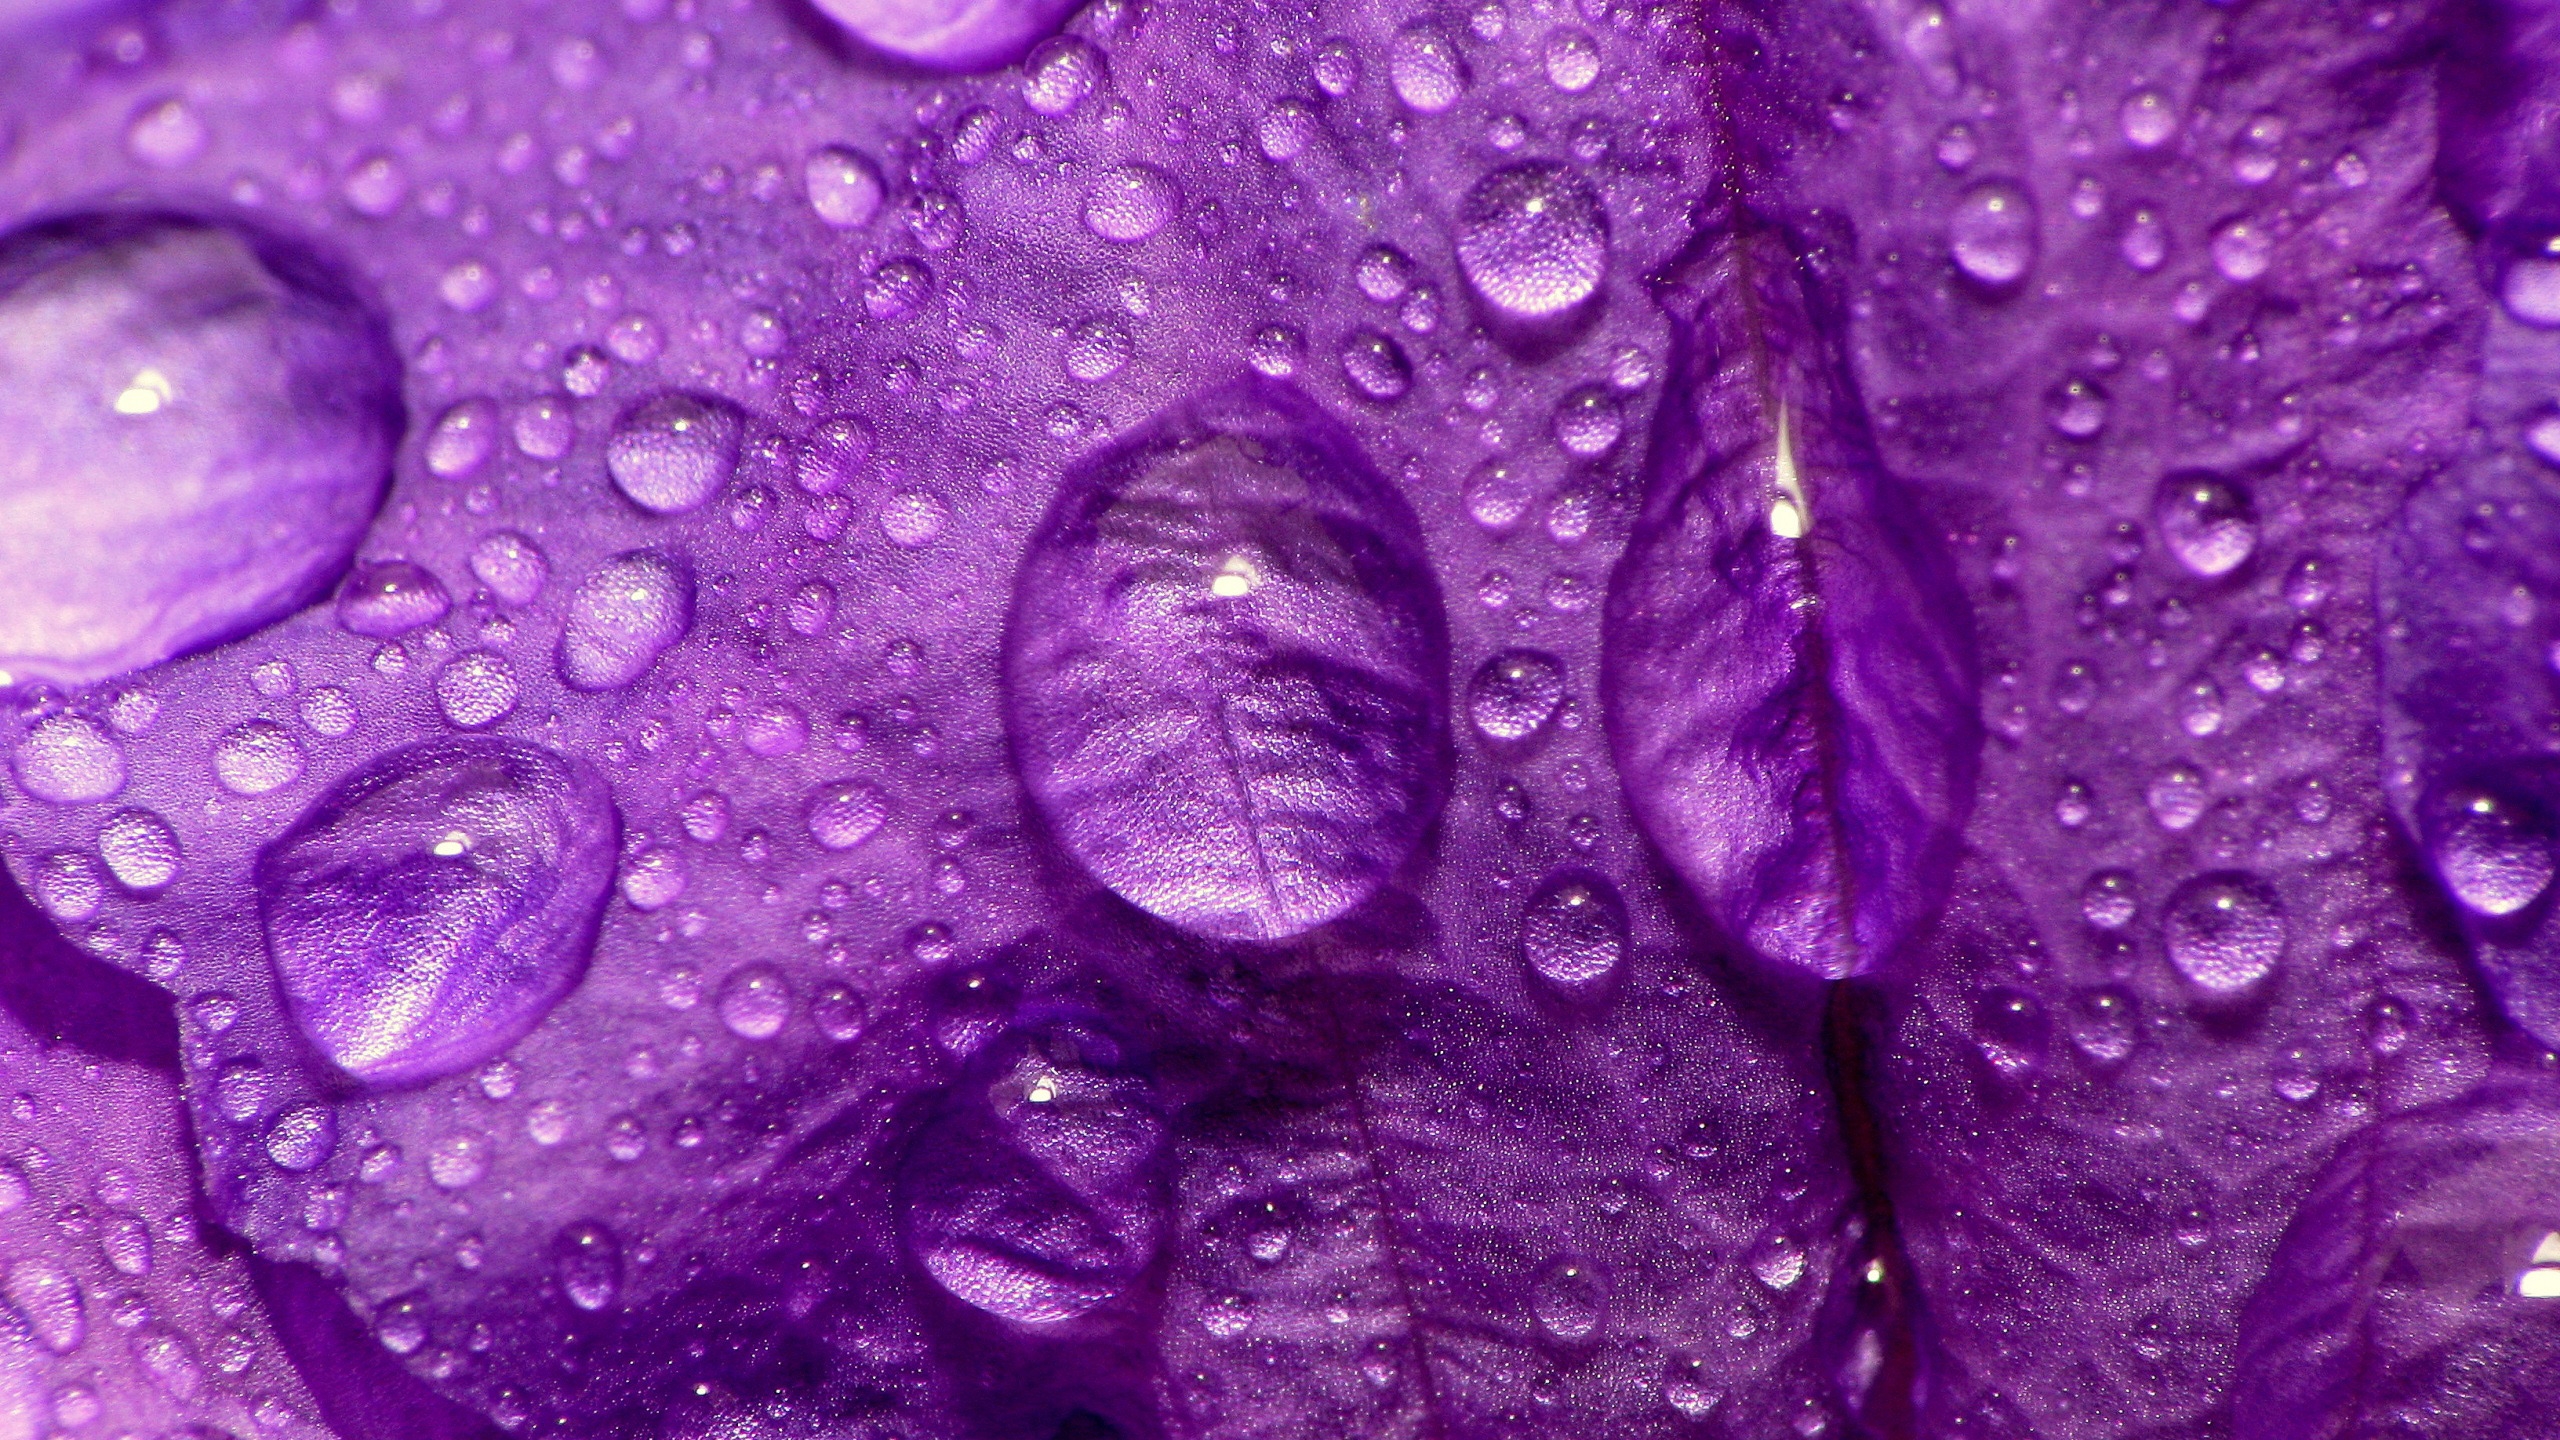 Purple Flower Close Up for 2560x1440 HDTV resolution